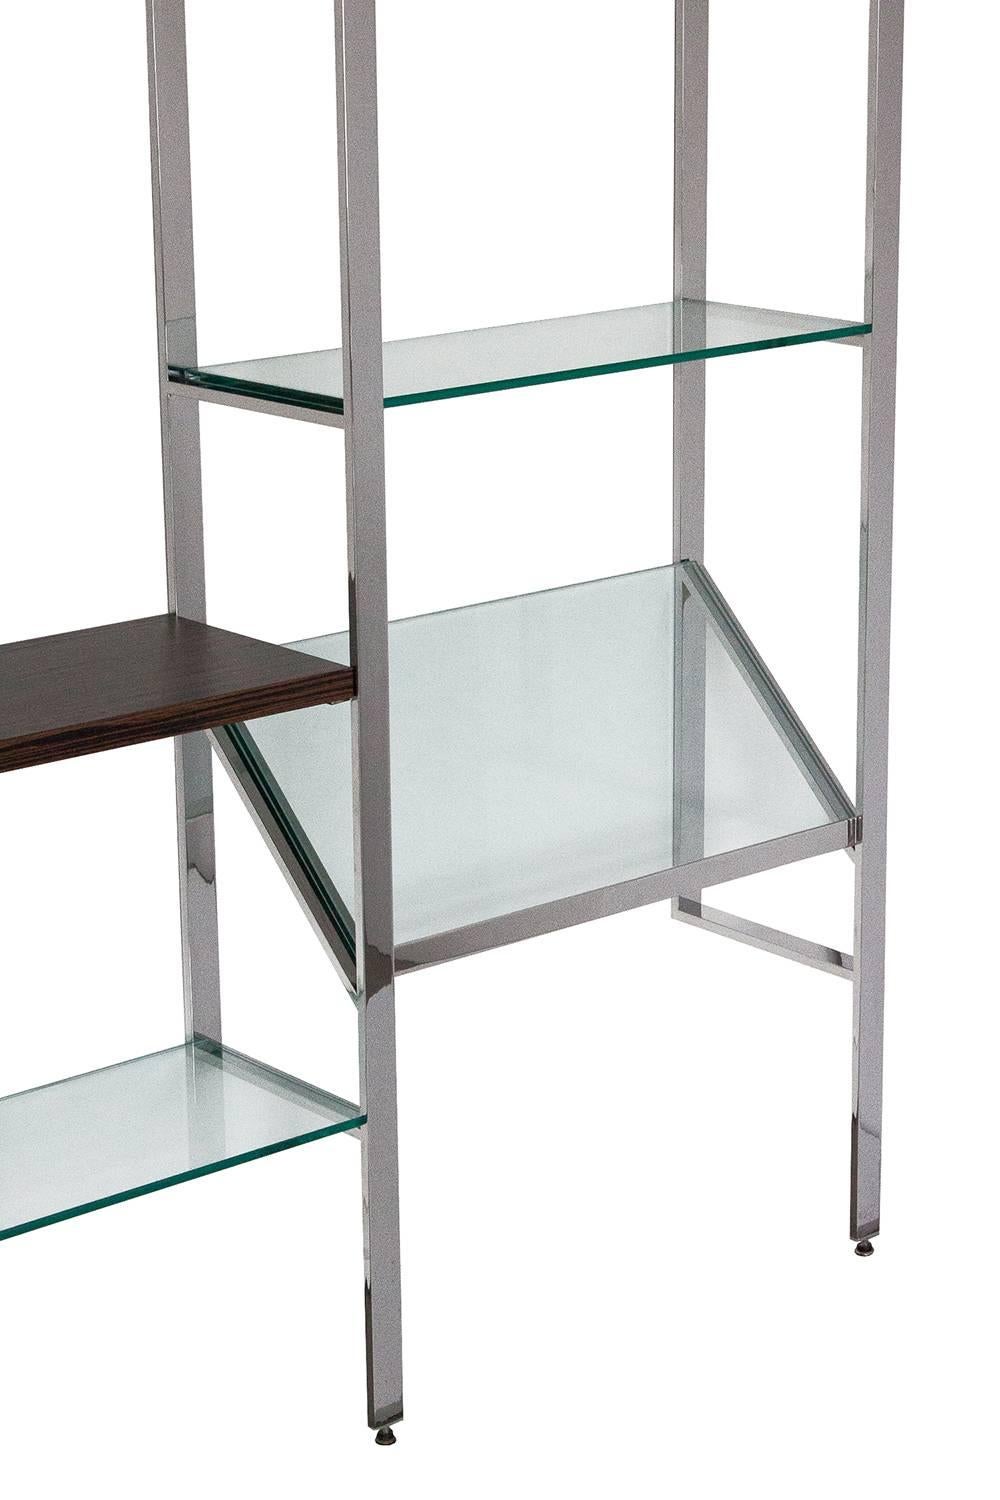 Plated Milo Baughman Chrome and Glass Wall-Mounted Shelving System